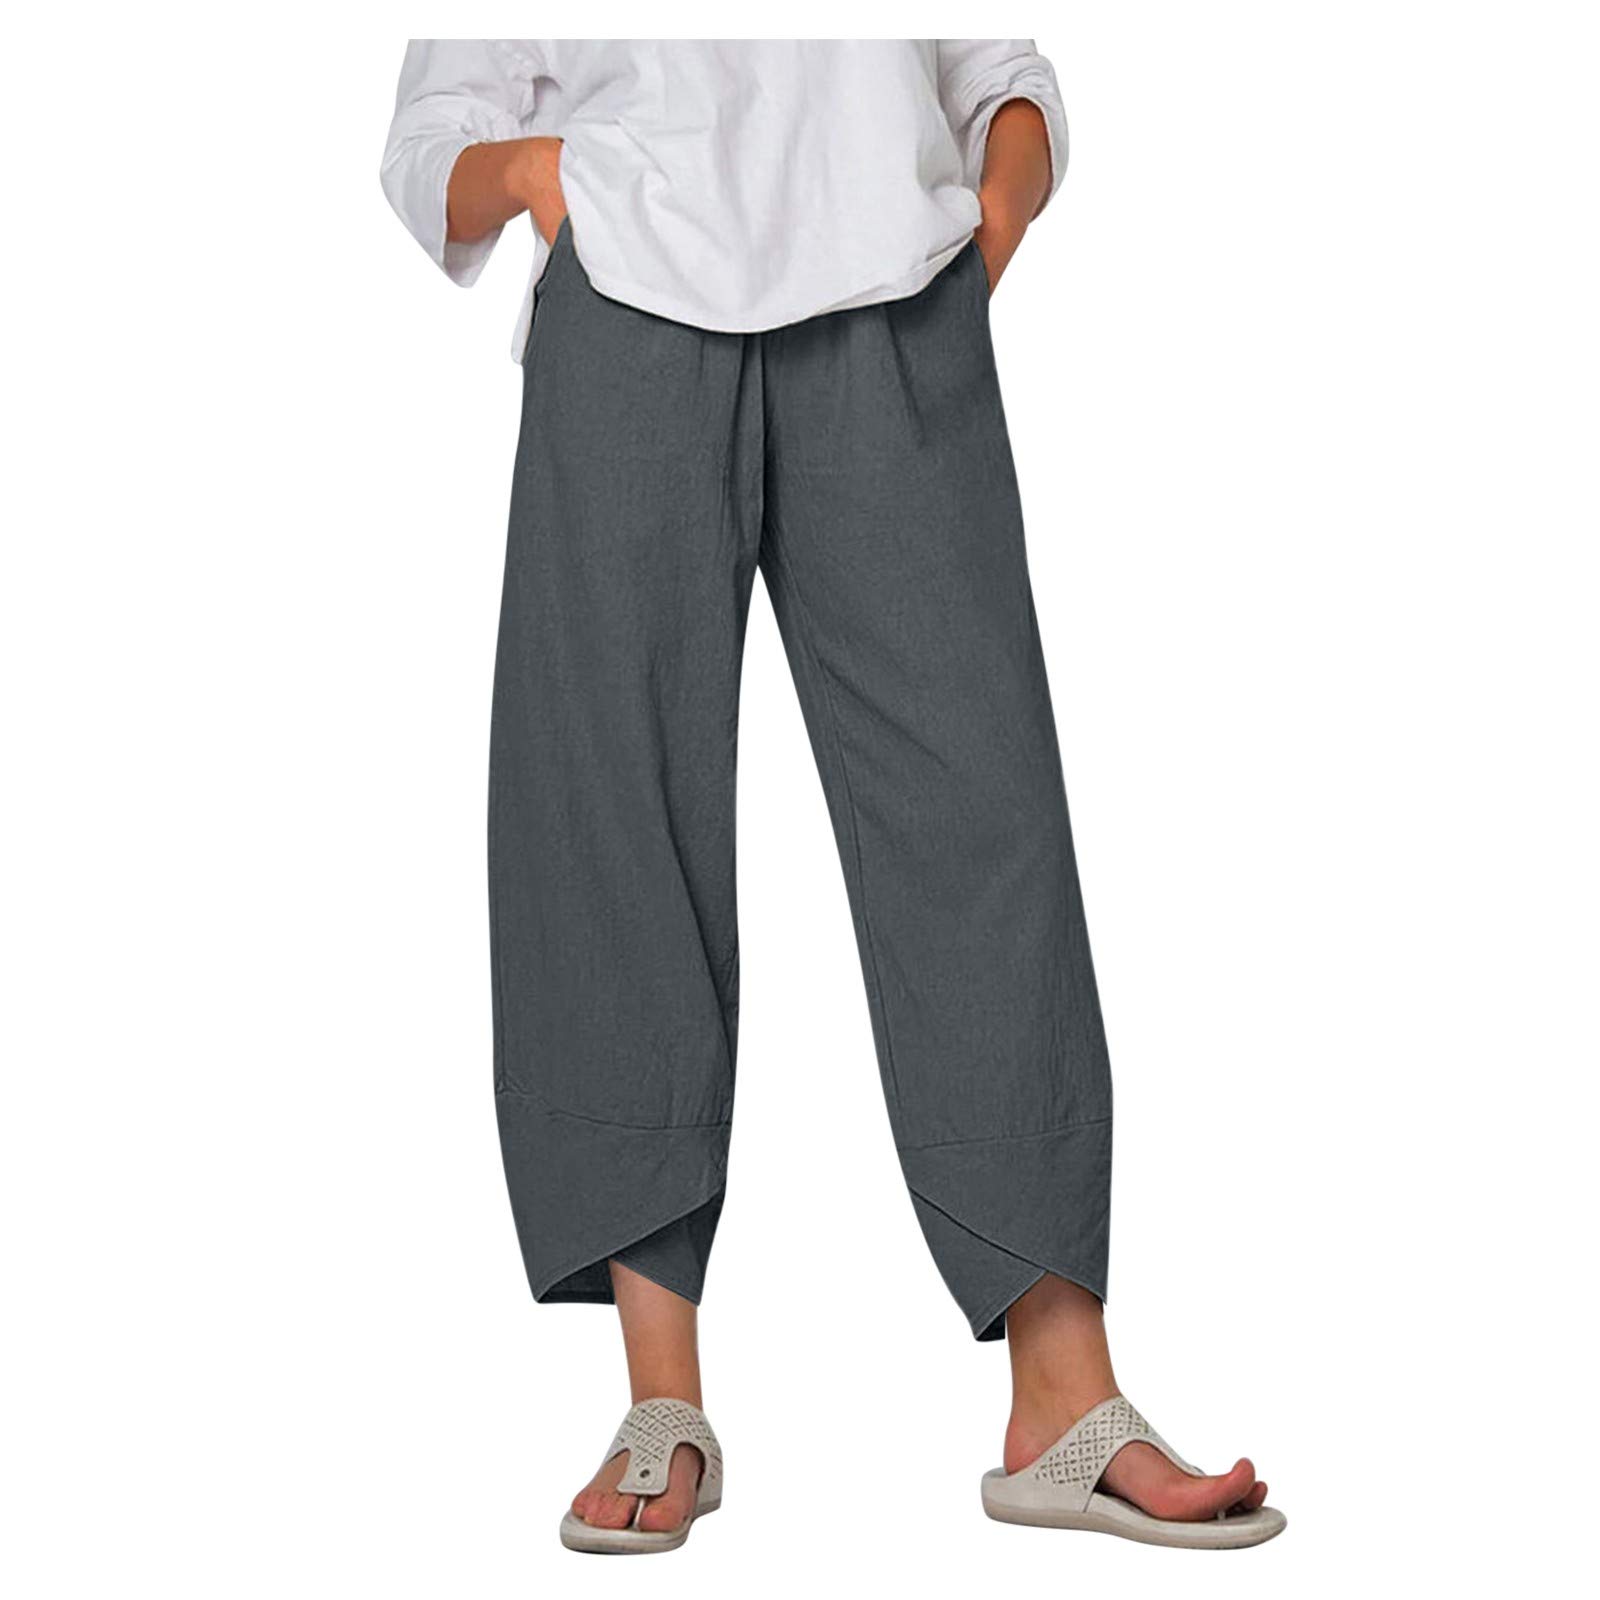 Bell Bottom Pants for Women Plus Size Women's Casual Summer Lightweight  Wide Leg Loose Cotton Cropped Tulip Pants 4X-Large 1-dark Gray